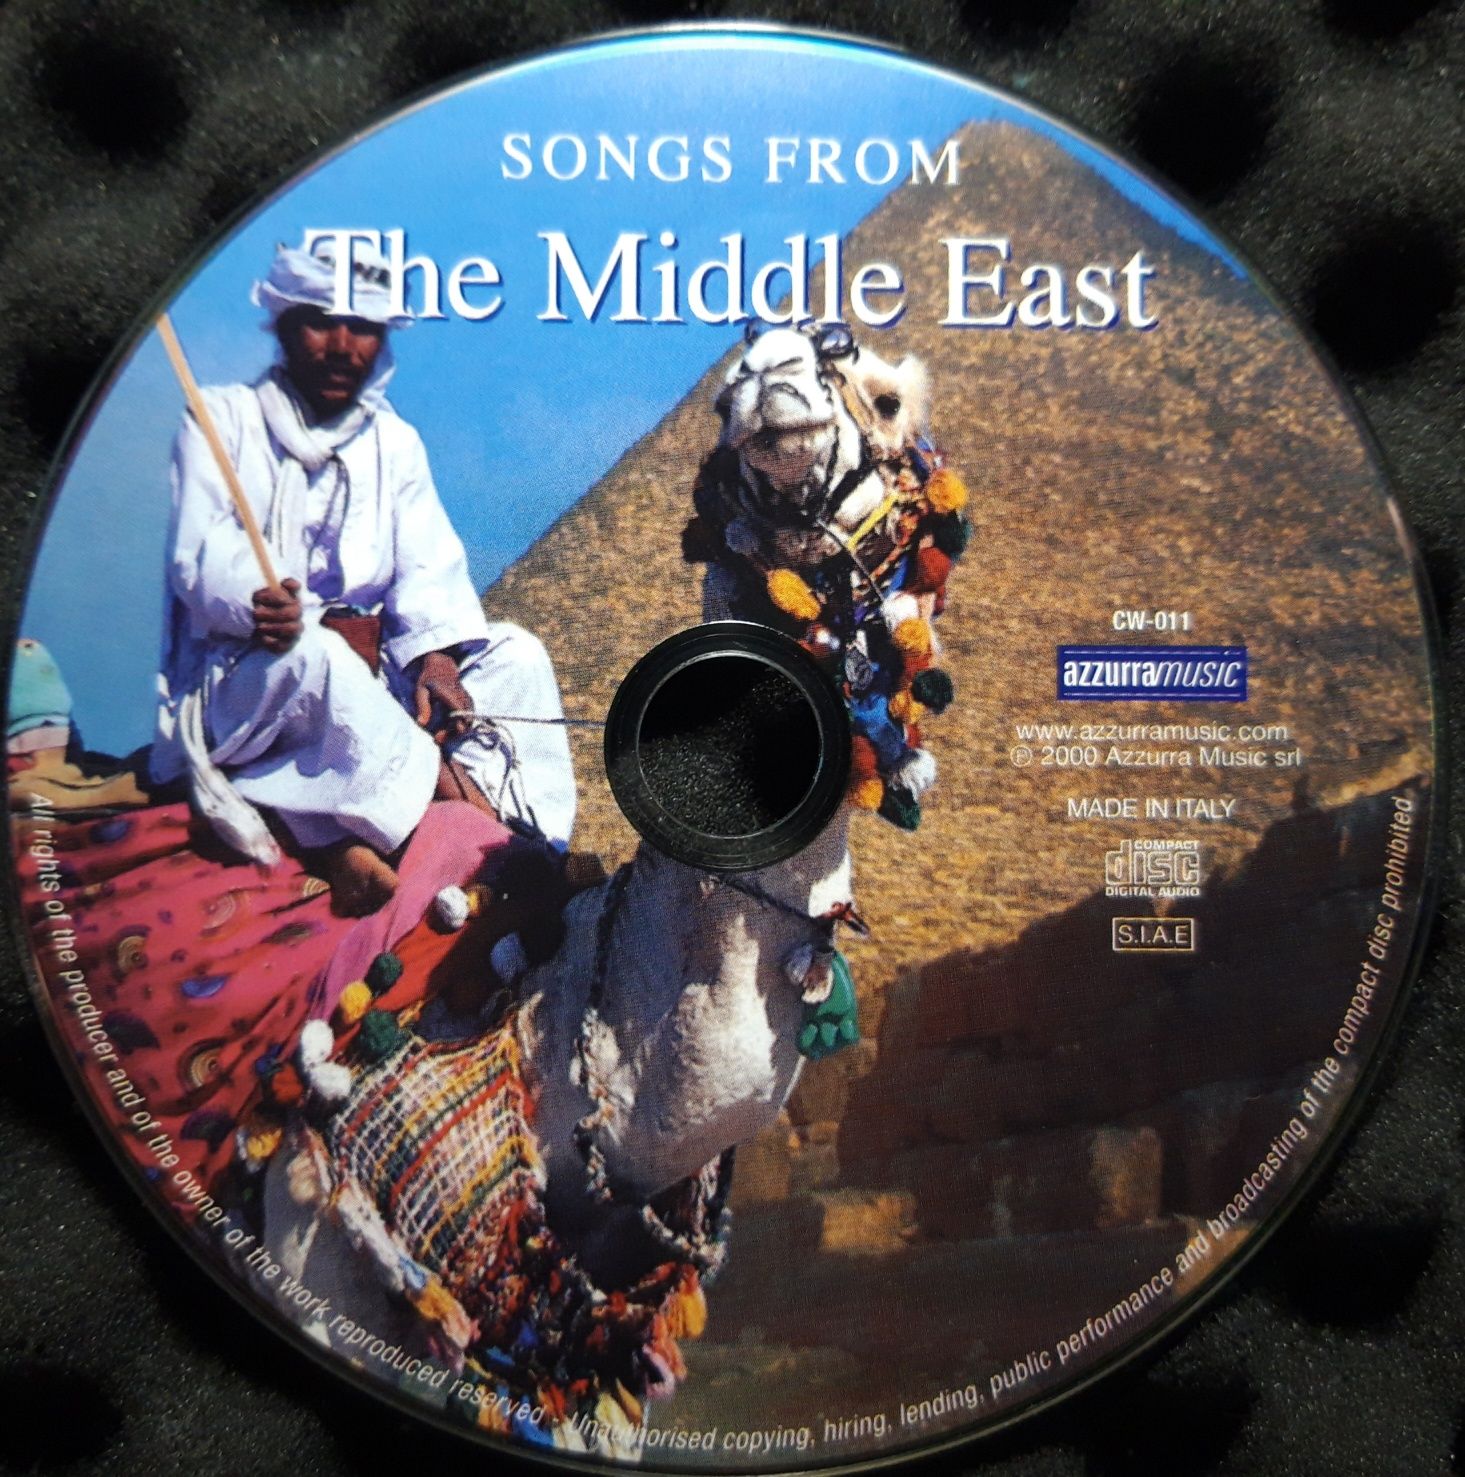 Ali Mrateh Fadh – A World Of Music: The Middle East (CD, 2000)